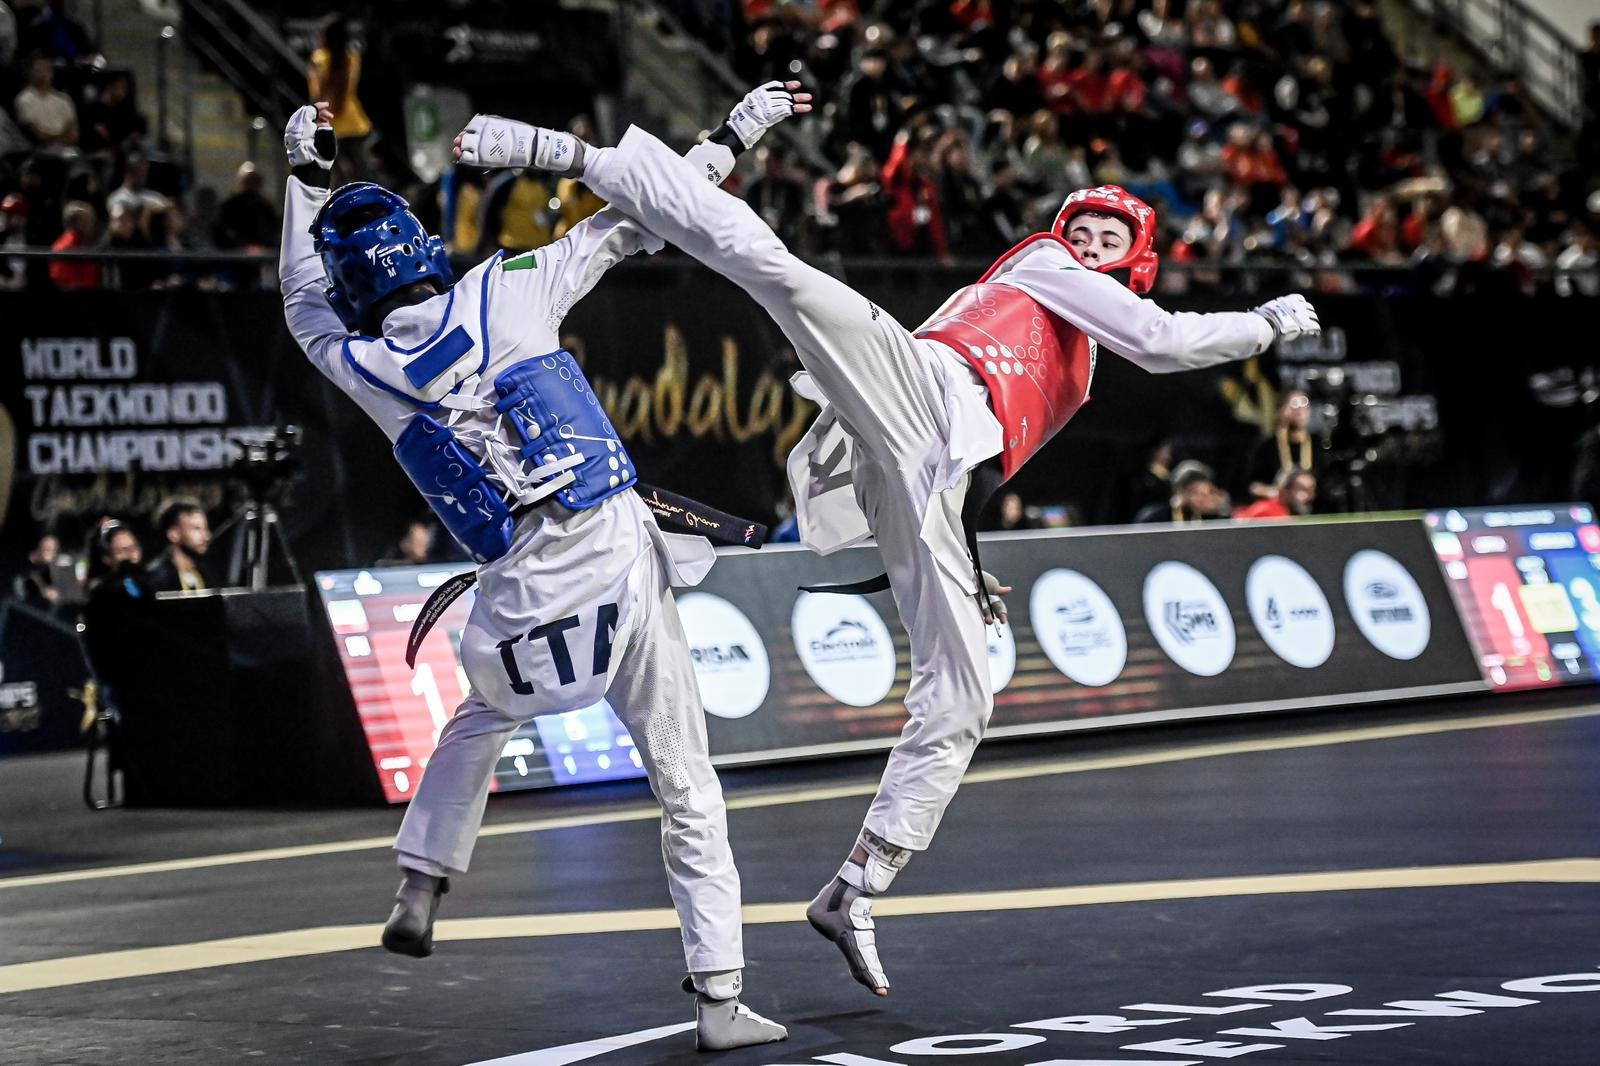 There were a number of spectacular shots on the final day in Guadalajara ©World Taekwondo